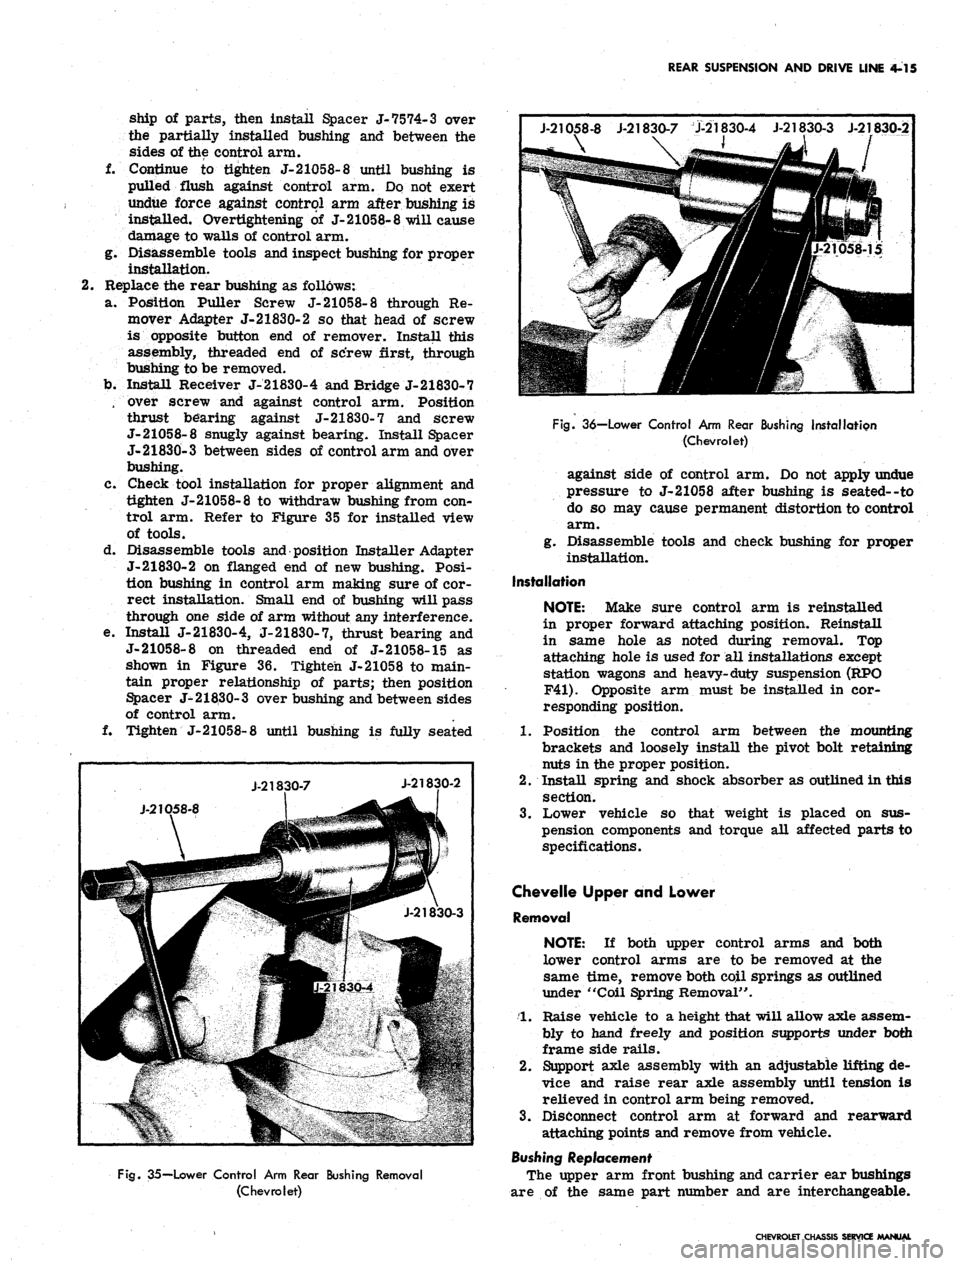 CHEVROLET CAMARO 1967 1.G Chassis Service Manual 
REAR SUSPENSION AND DRIVE LINE 4-15

ship of parts, then install Spacer J-
 7574-
 3 over

the partially installed bushing and between the

sides of the control arm.

f. Continue to tighten J-
 21058